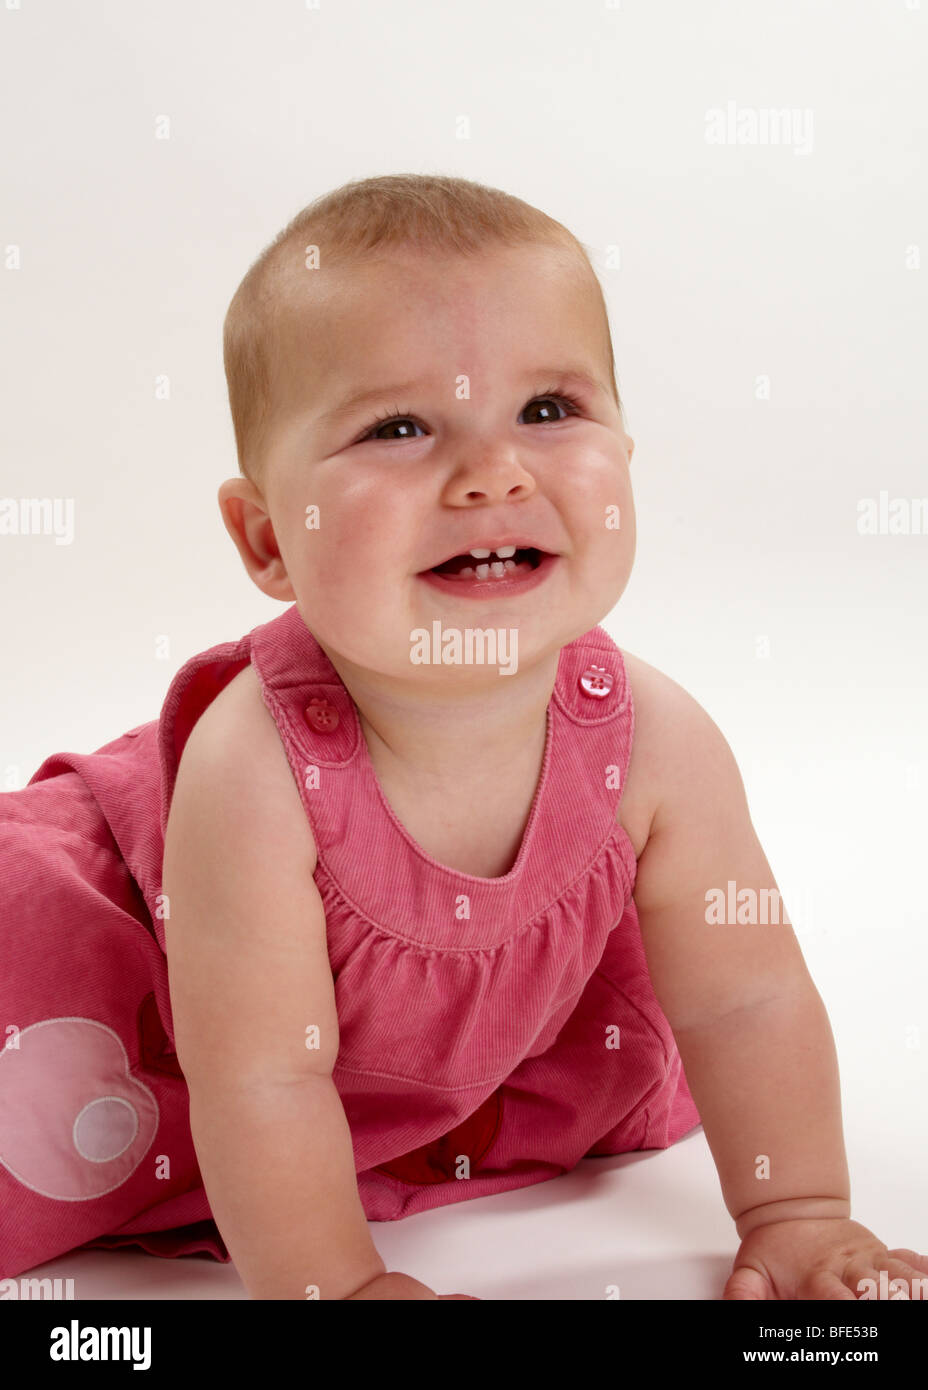 1 year old baby girl in pink dress on white background Stock Photo